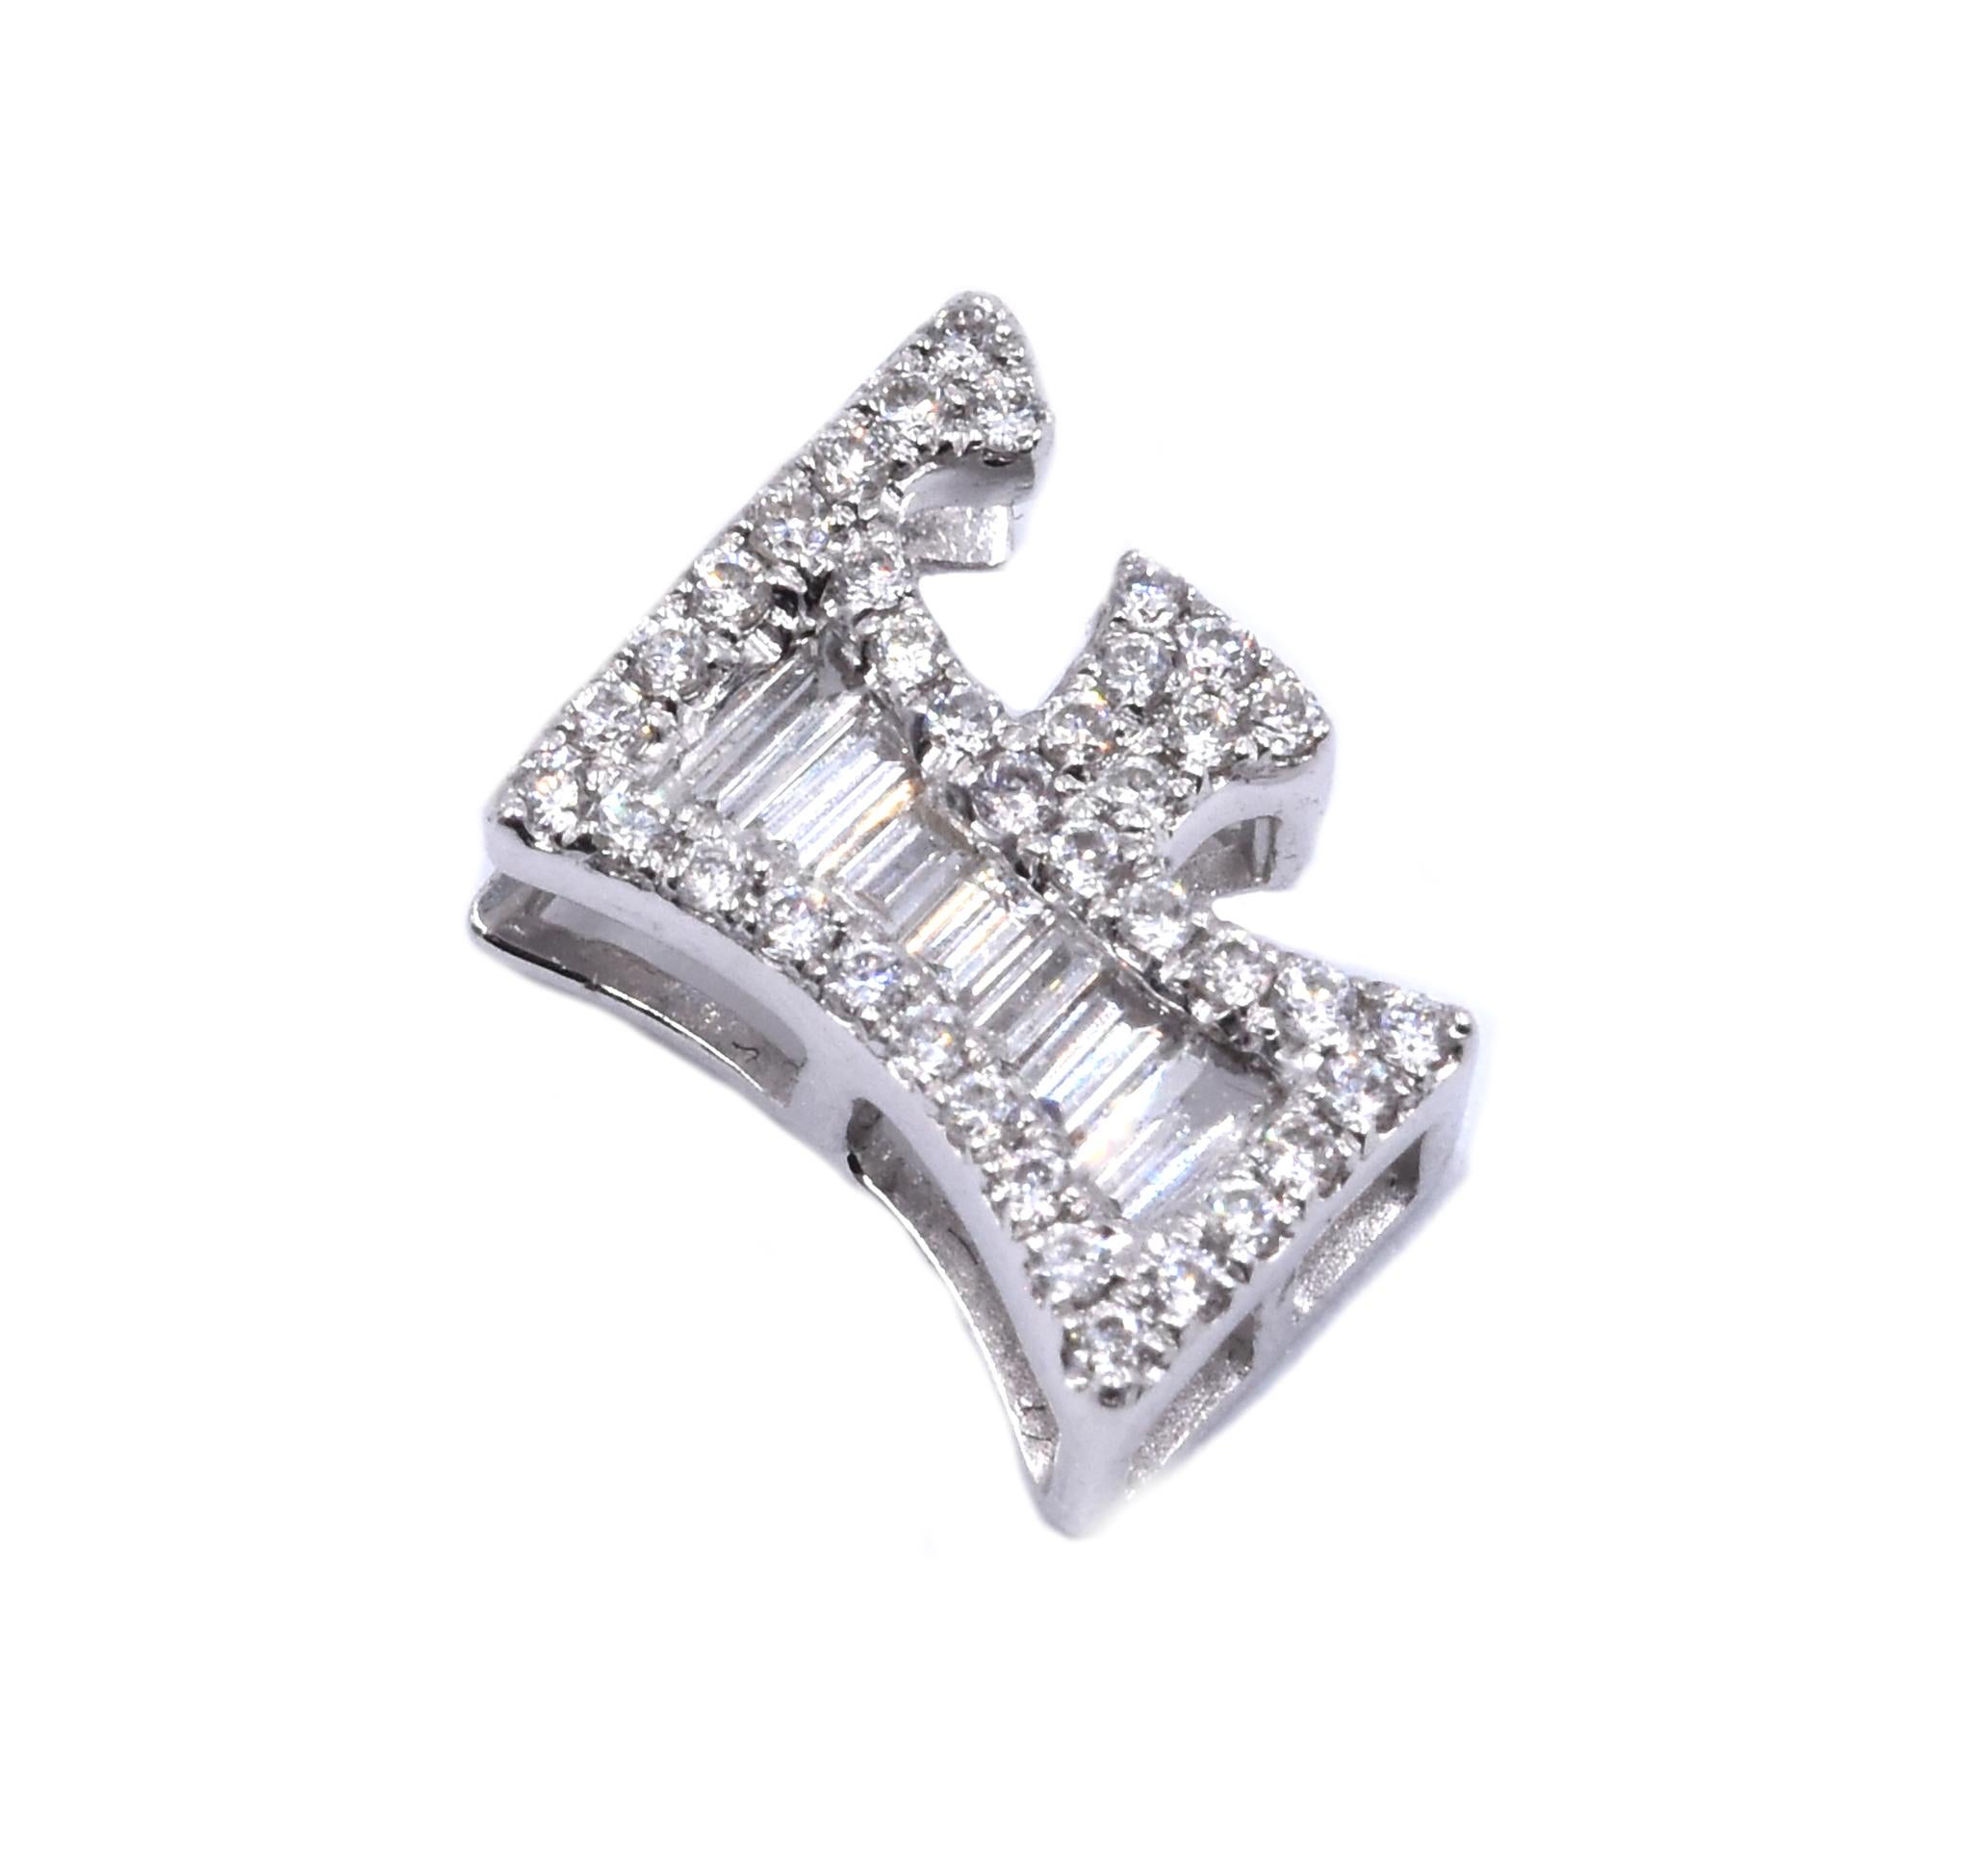 Designer: custom 
Material: 18K white gold
Diamonds: 45 round and baguette cut = .31cttw
Color: G
Clarity: VS
Dimensions: pendant measures 10.71 X 7.8mm
Weight: 1.41 grams
